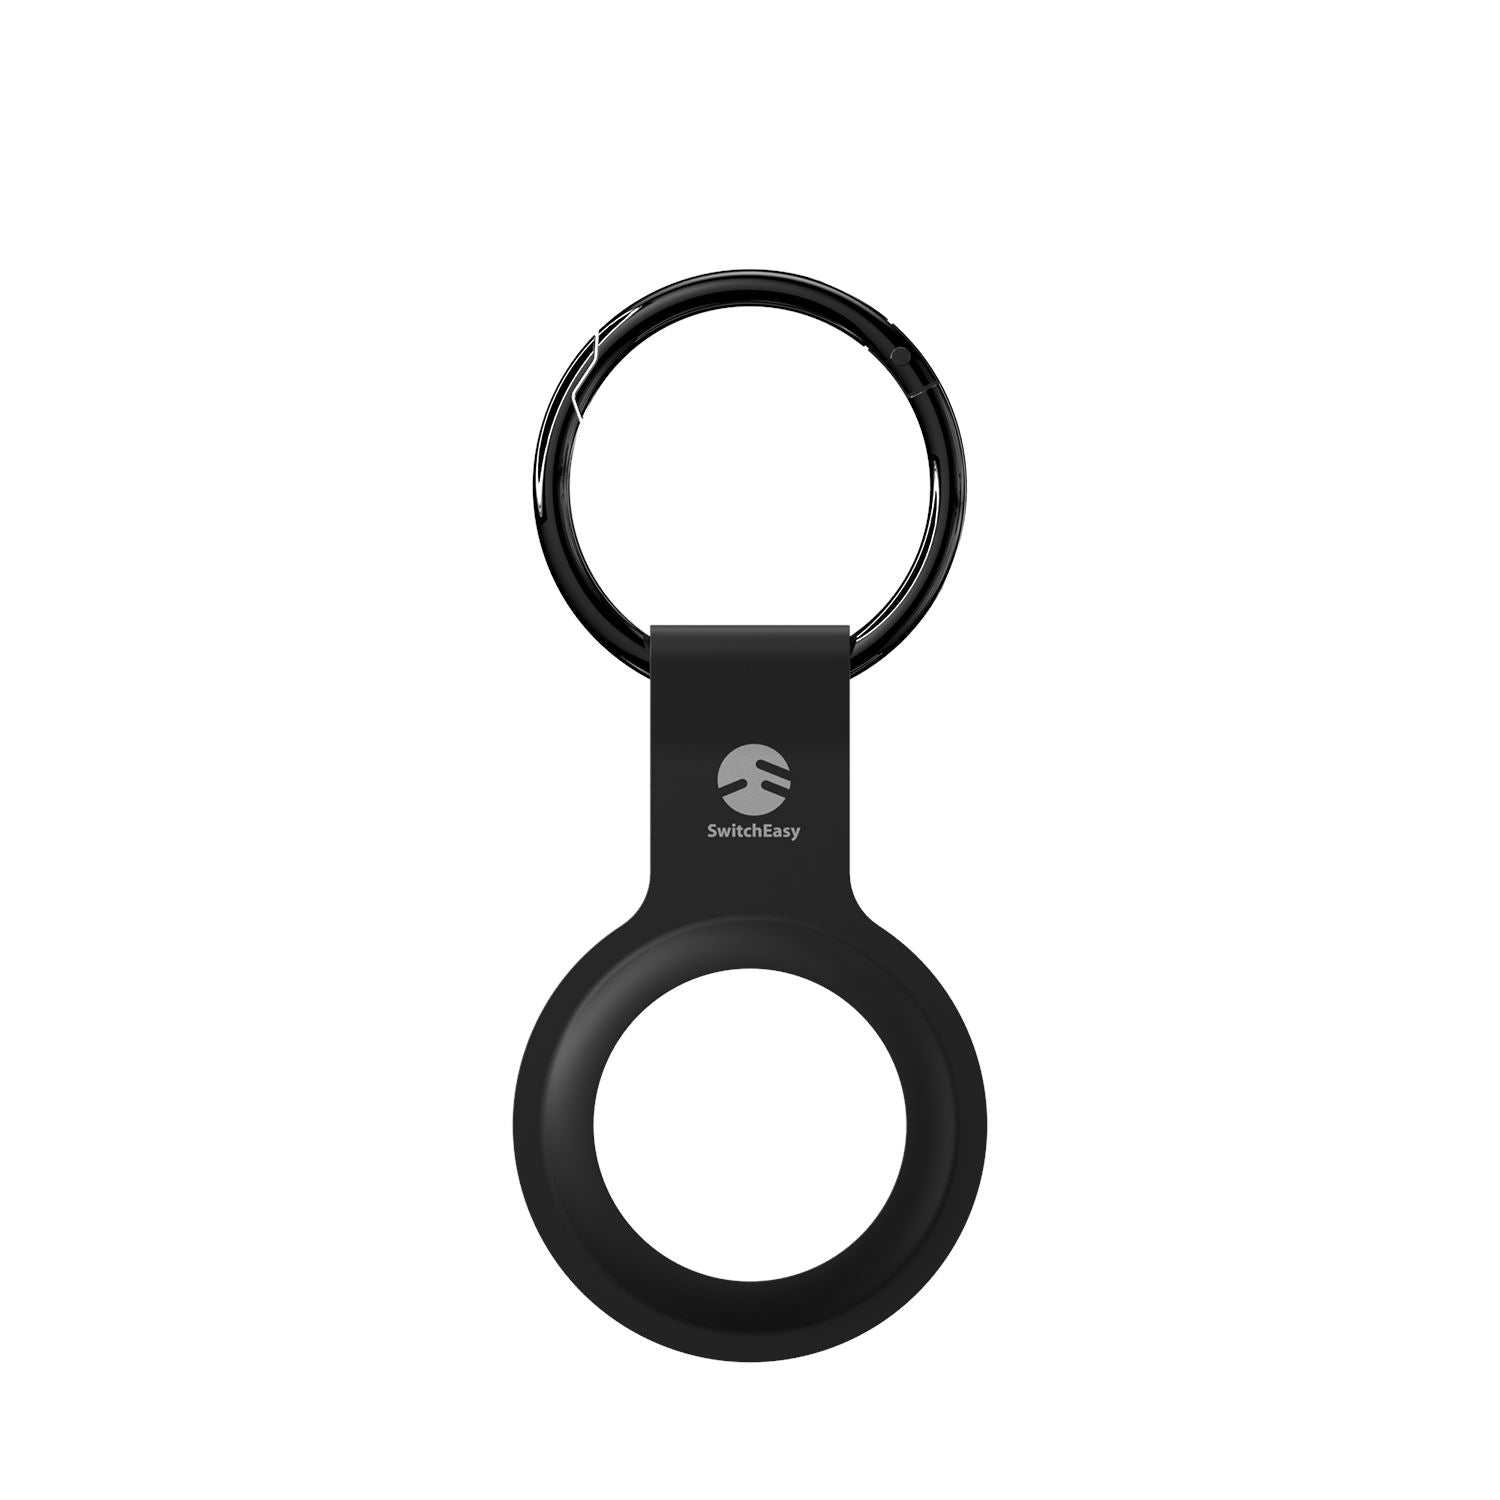 Switcheasy Skin Silicone Keyring For AirTag, Black Default Switcheasy 